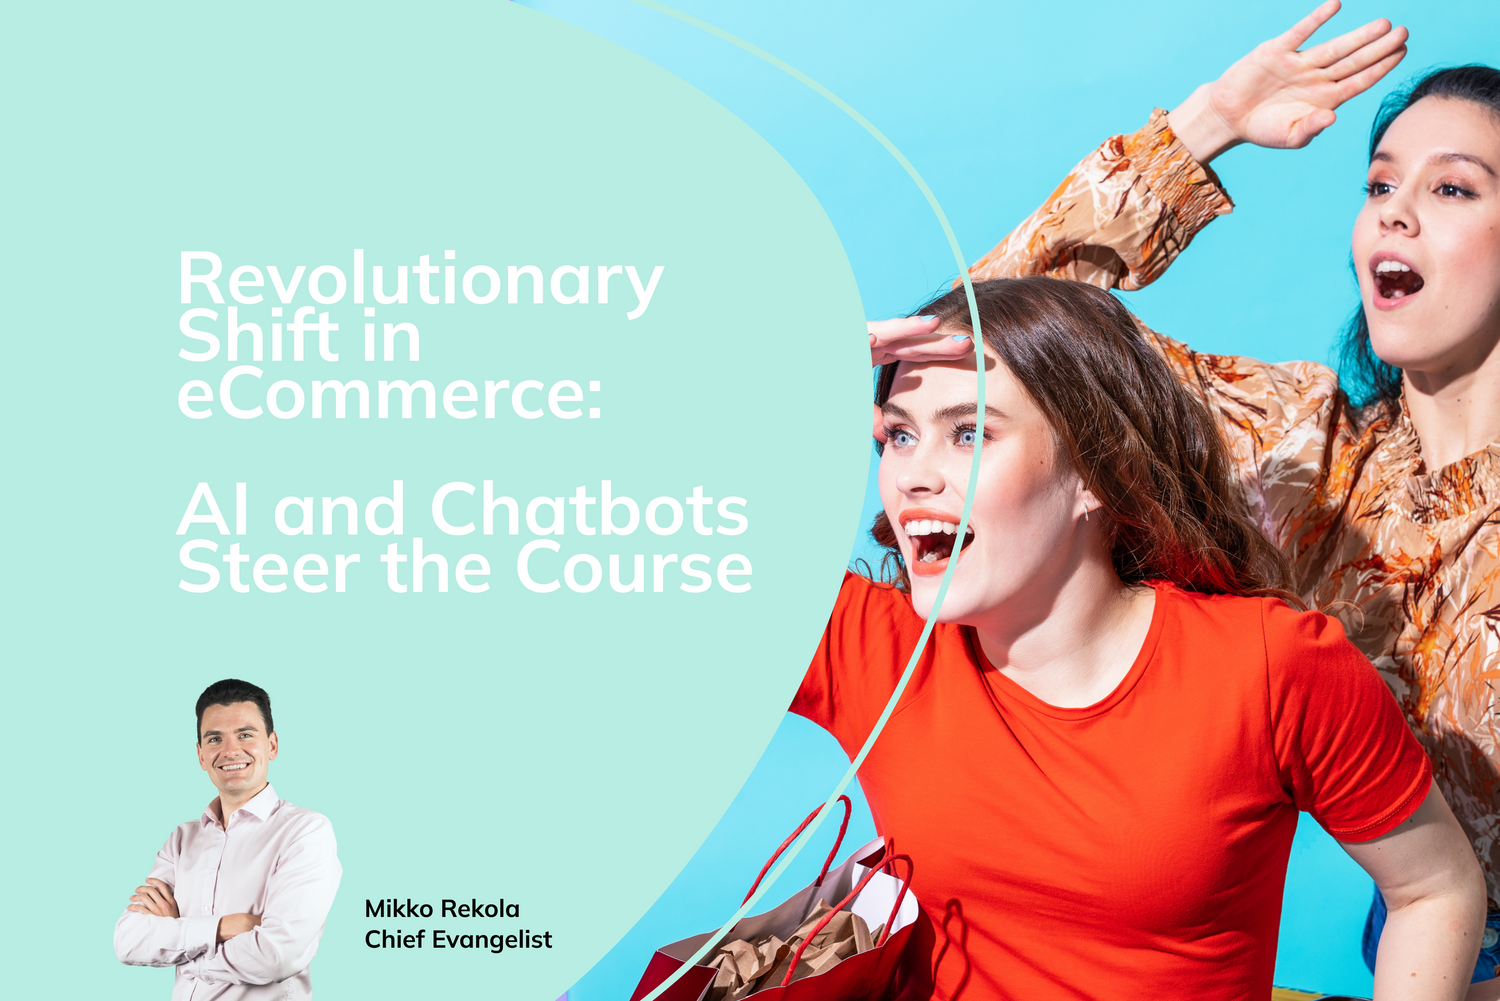 A Revolutionary Shift in eCommerce: AI and Chatbots Steer the Course